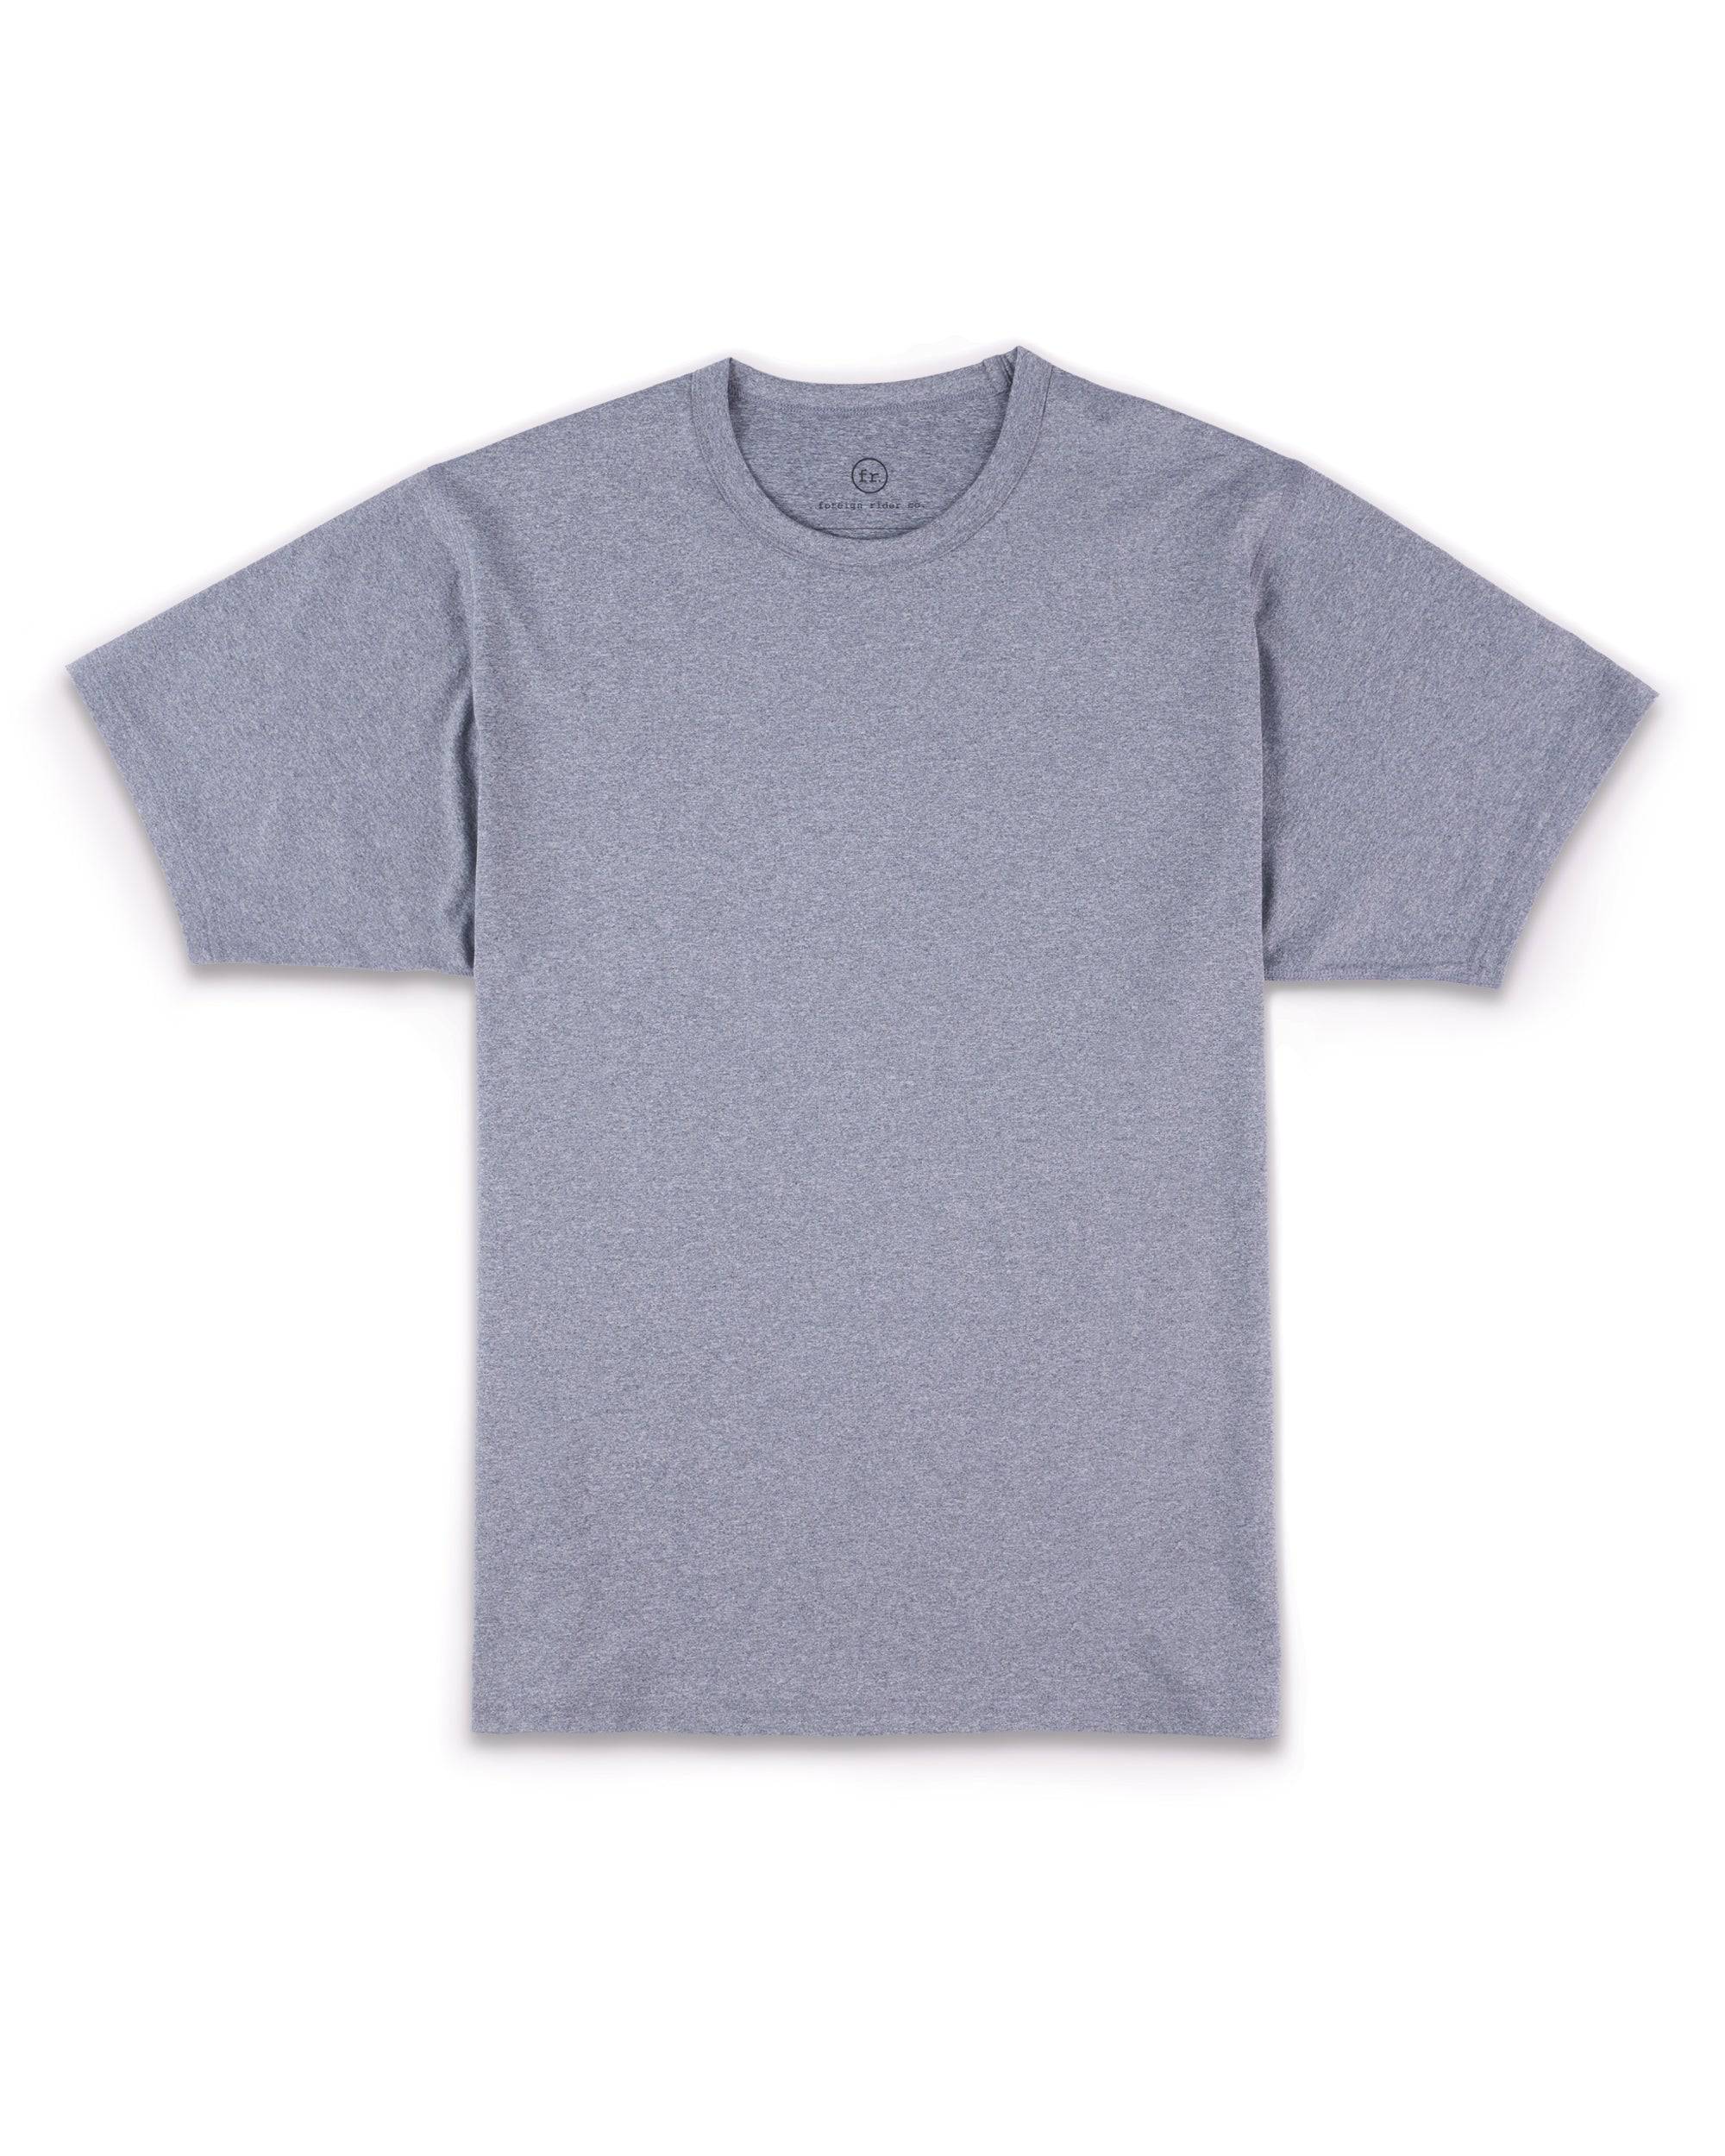 Performance SS T-Shirt Grey - Foreign Rider Co.